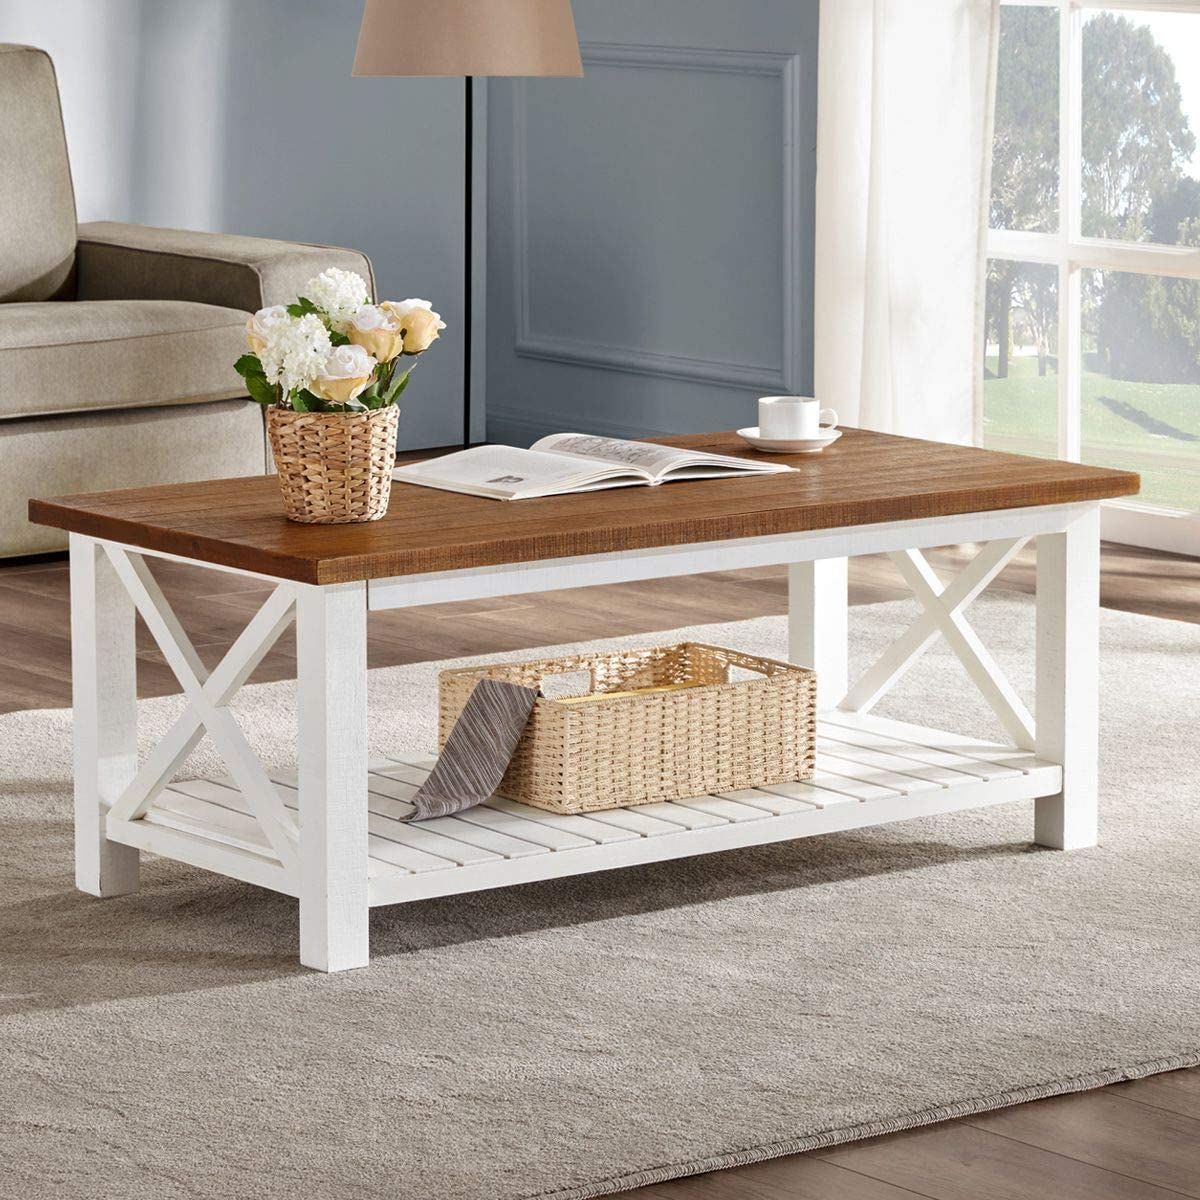 Living Room Farmhouse Coffee Tables In Popular The 10 Best Farmhouse Coffee Tables (for Any Budget) (View 2 of 15)